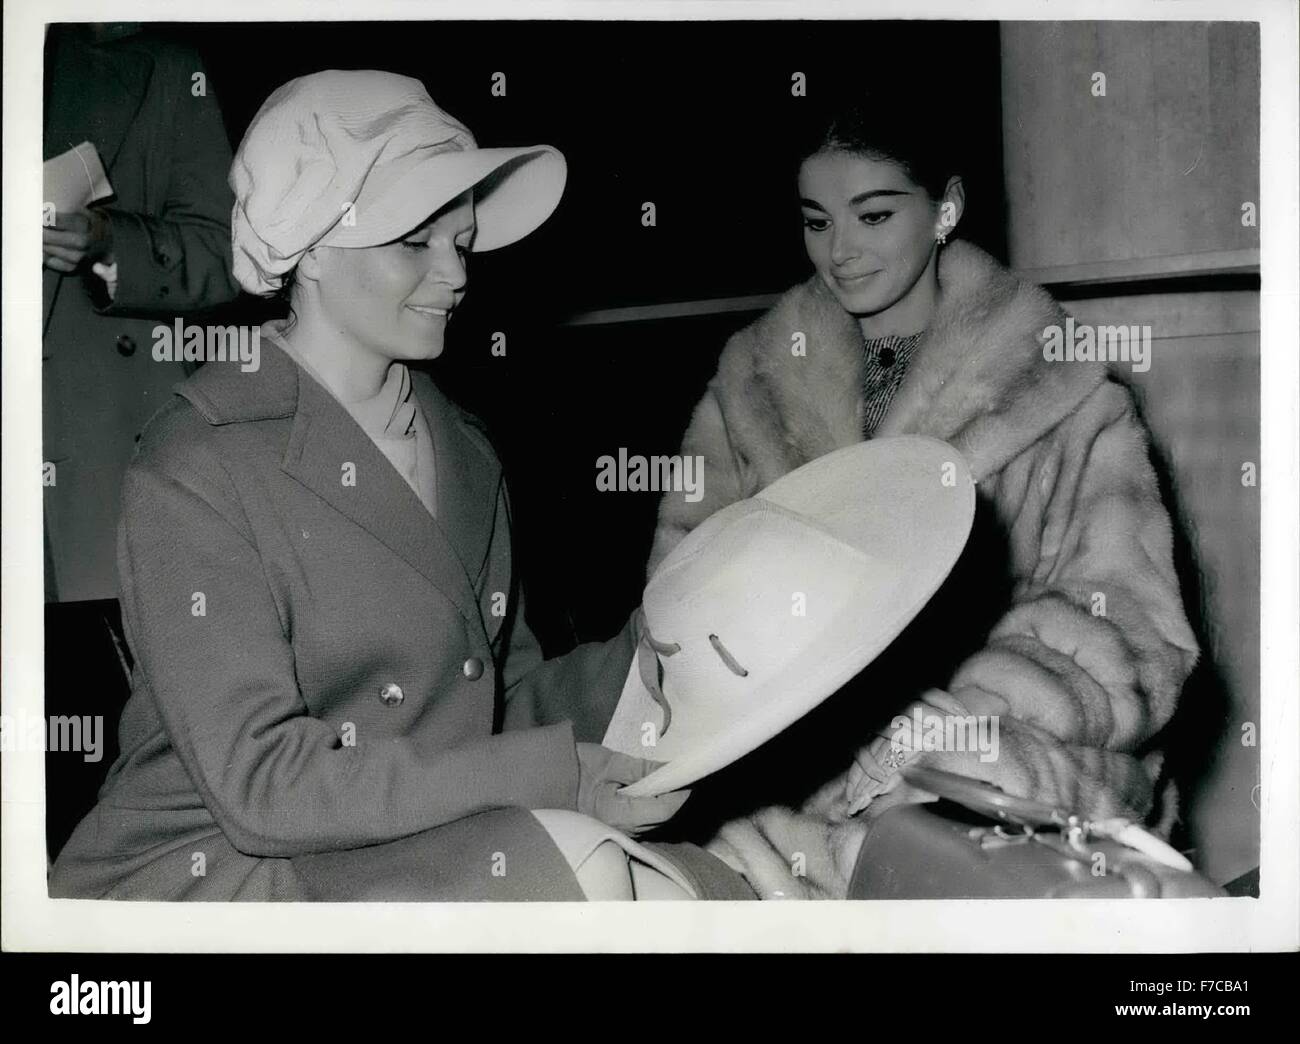 1959 - 18.14.59 Film Stars Leave for Canary Islands Film stars, including Eva Bartok, Pier Angeli, Richard Attenborough and John Gregson, left Gatwick Airport today for the Canary Islands, for location shooting of the film S.O.S. Pacific Keystone Photo Shows: Eva Bartok admires Pier Angeli s straw sun hat, which Miss Angeli carries every where, as a sort of mascot prior to their departure from Gatwick today. © Keystone Pictures USA/ZUMAPRESS.com/Alamy Live News Stock Photo